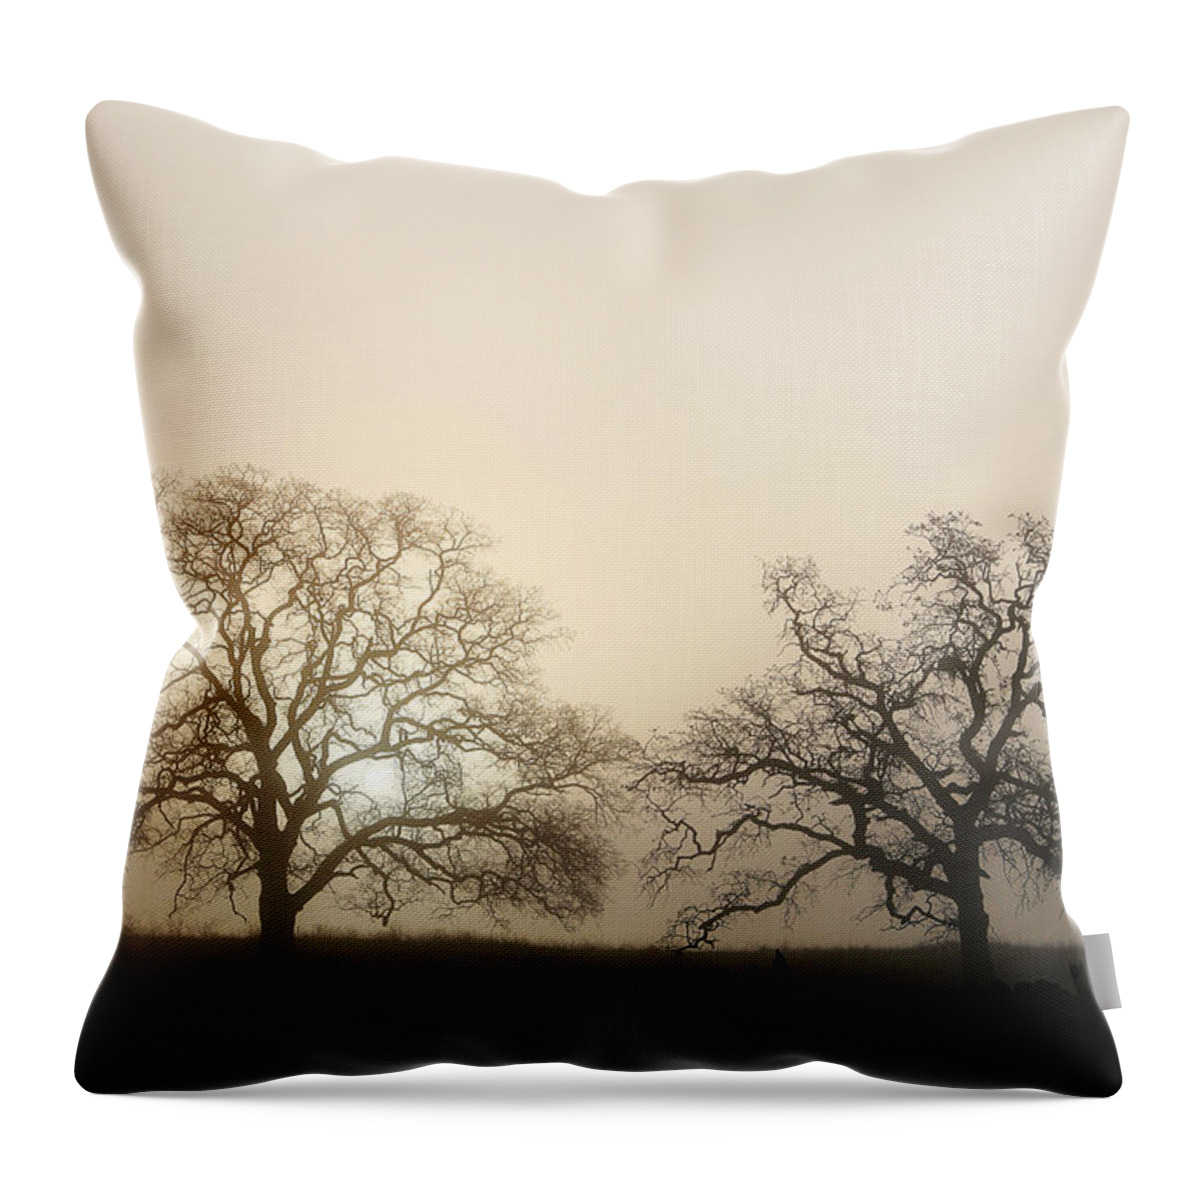 Chico Throw Pillow featuring the photograph Two Trees In Fog by Robert Woodward